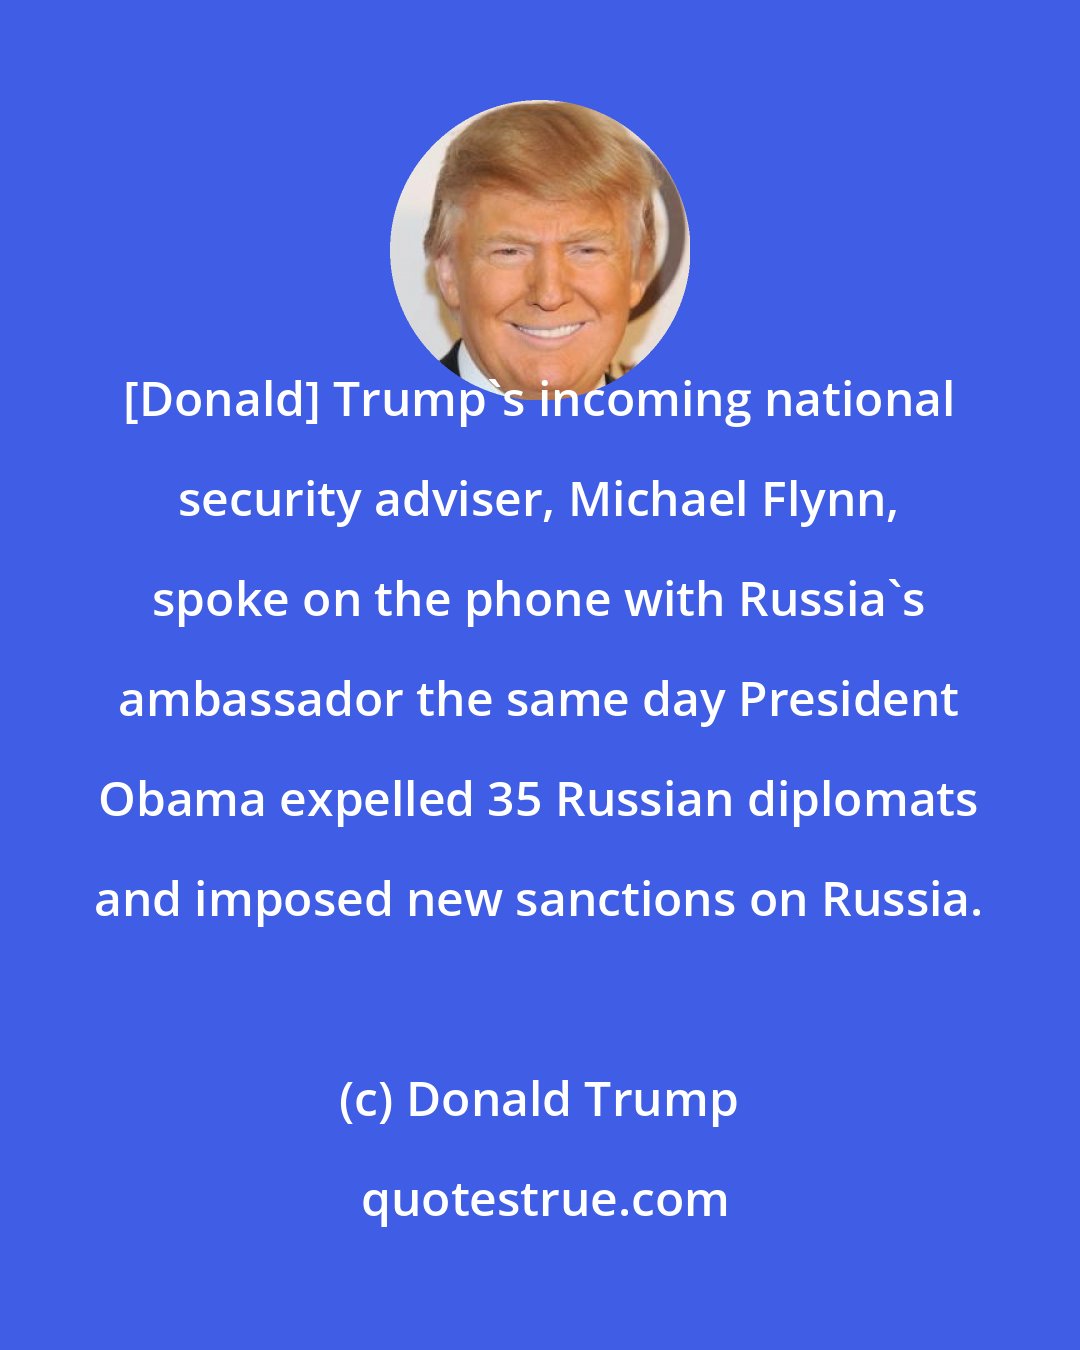 Donald Trump: [Donald] Trump`s incoming national security adviser, Michael Flynn, spoke on the phone with Russia`s ambassador the same day President Obama expelled 35 Russian diplomats and imposed new sanctions on Russia.